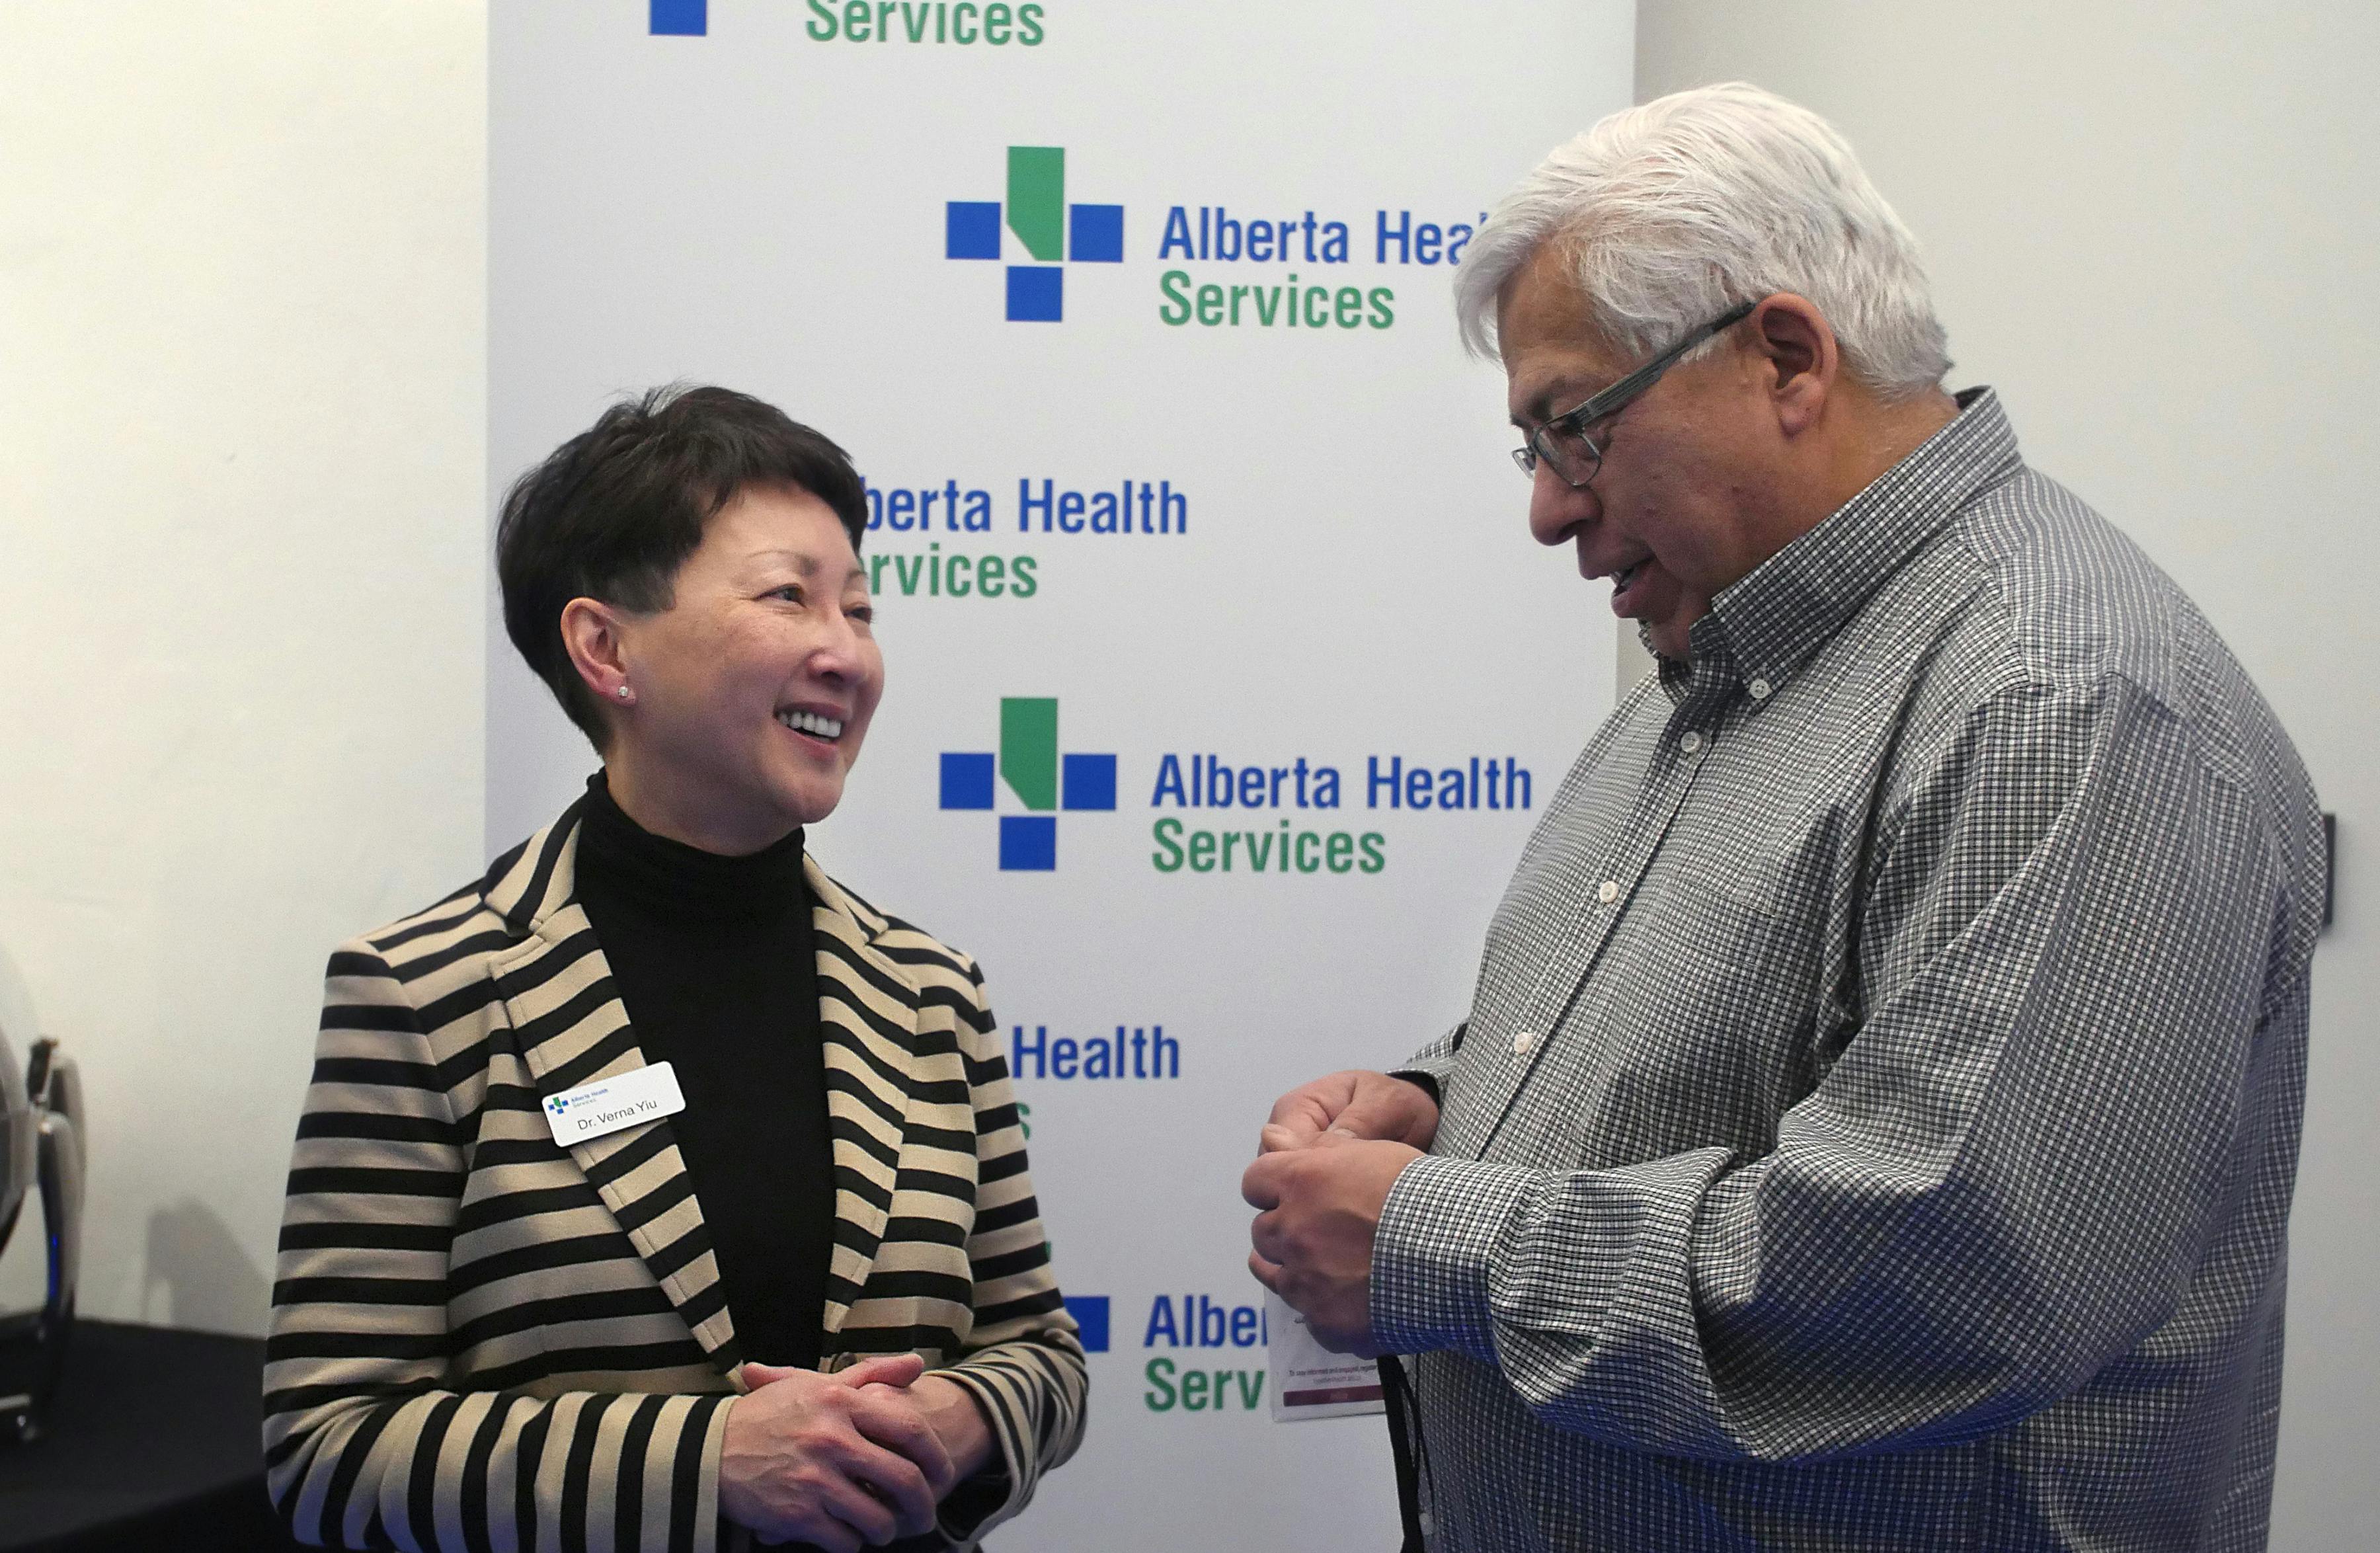 Conversation with Dr. Verna Yiu in Calgary